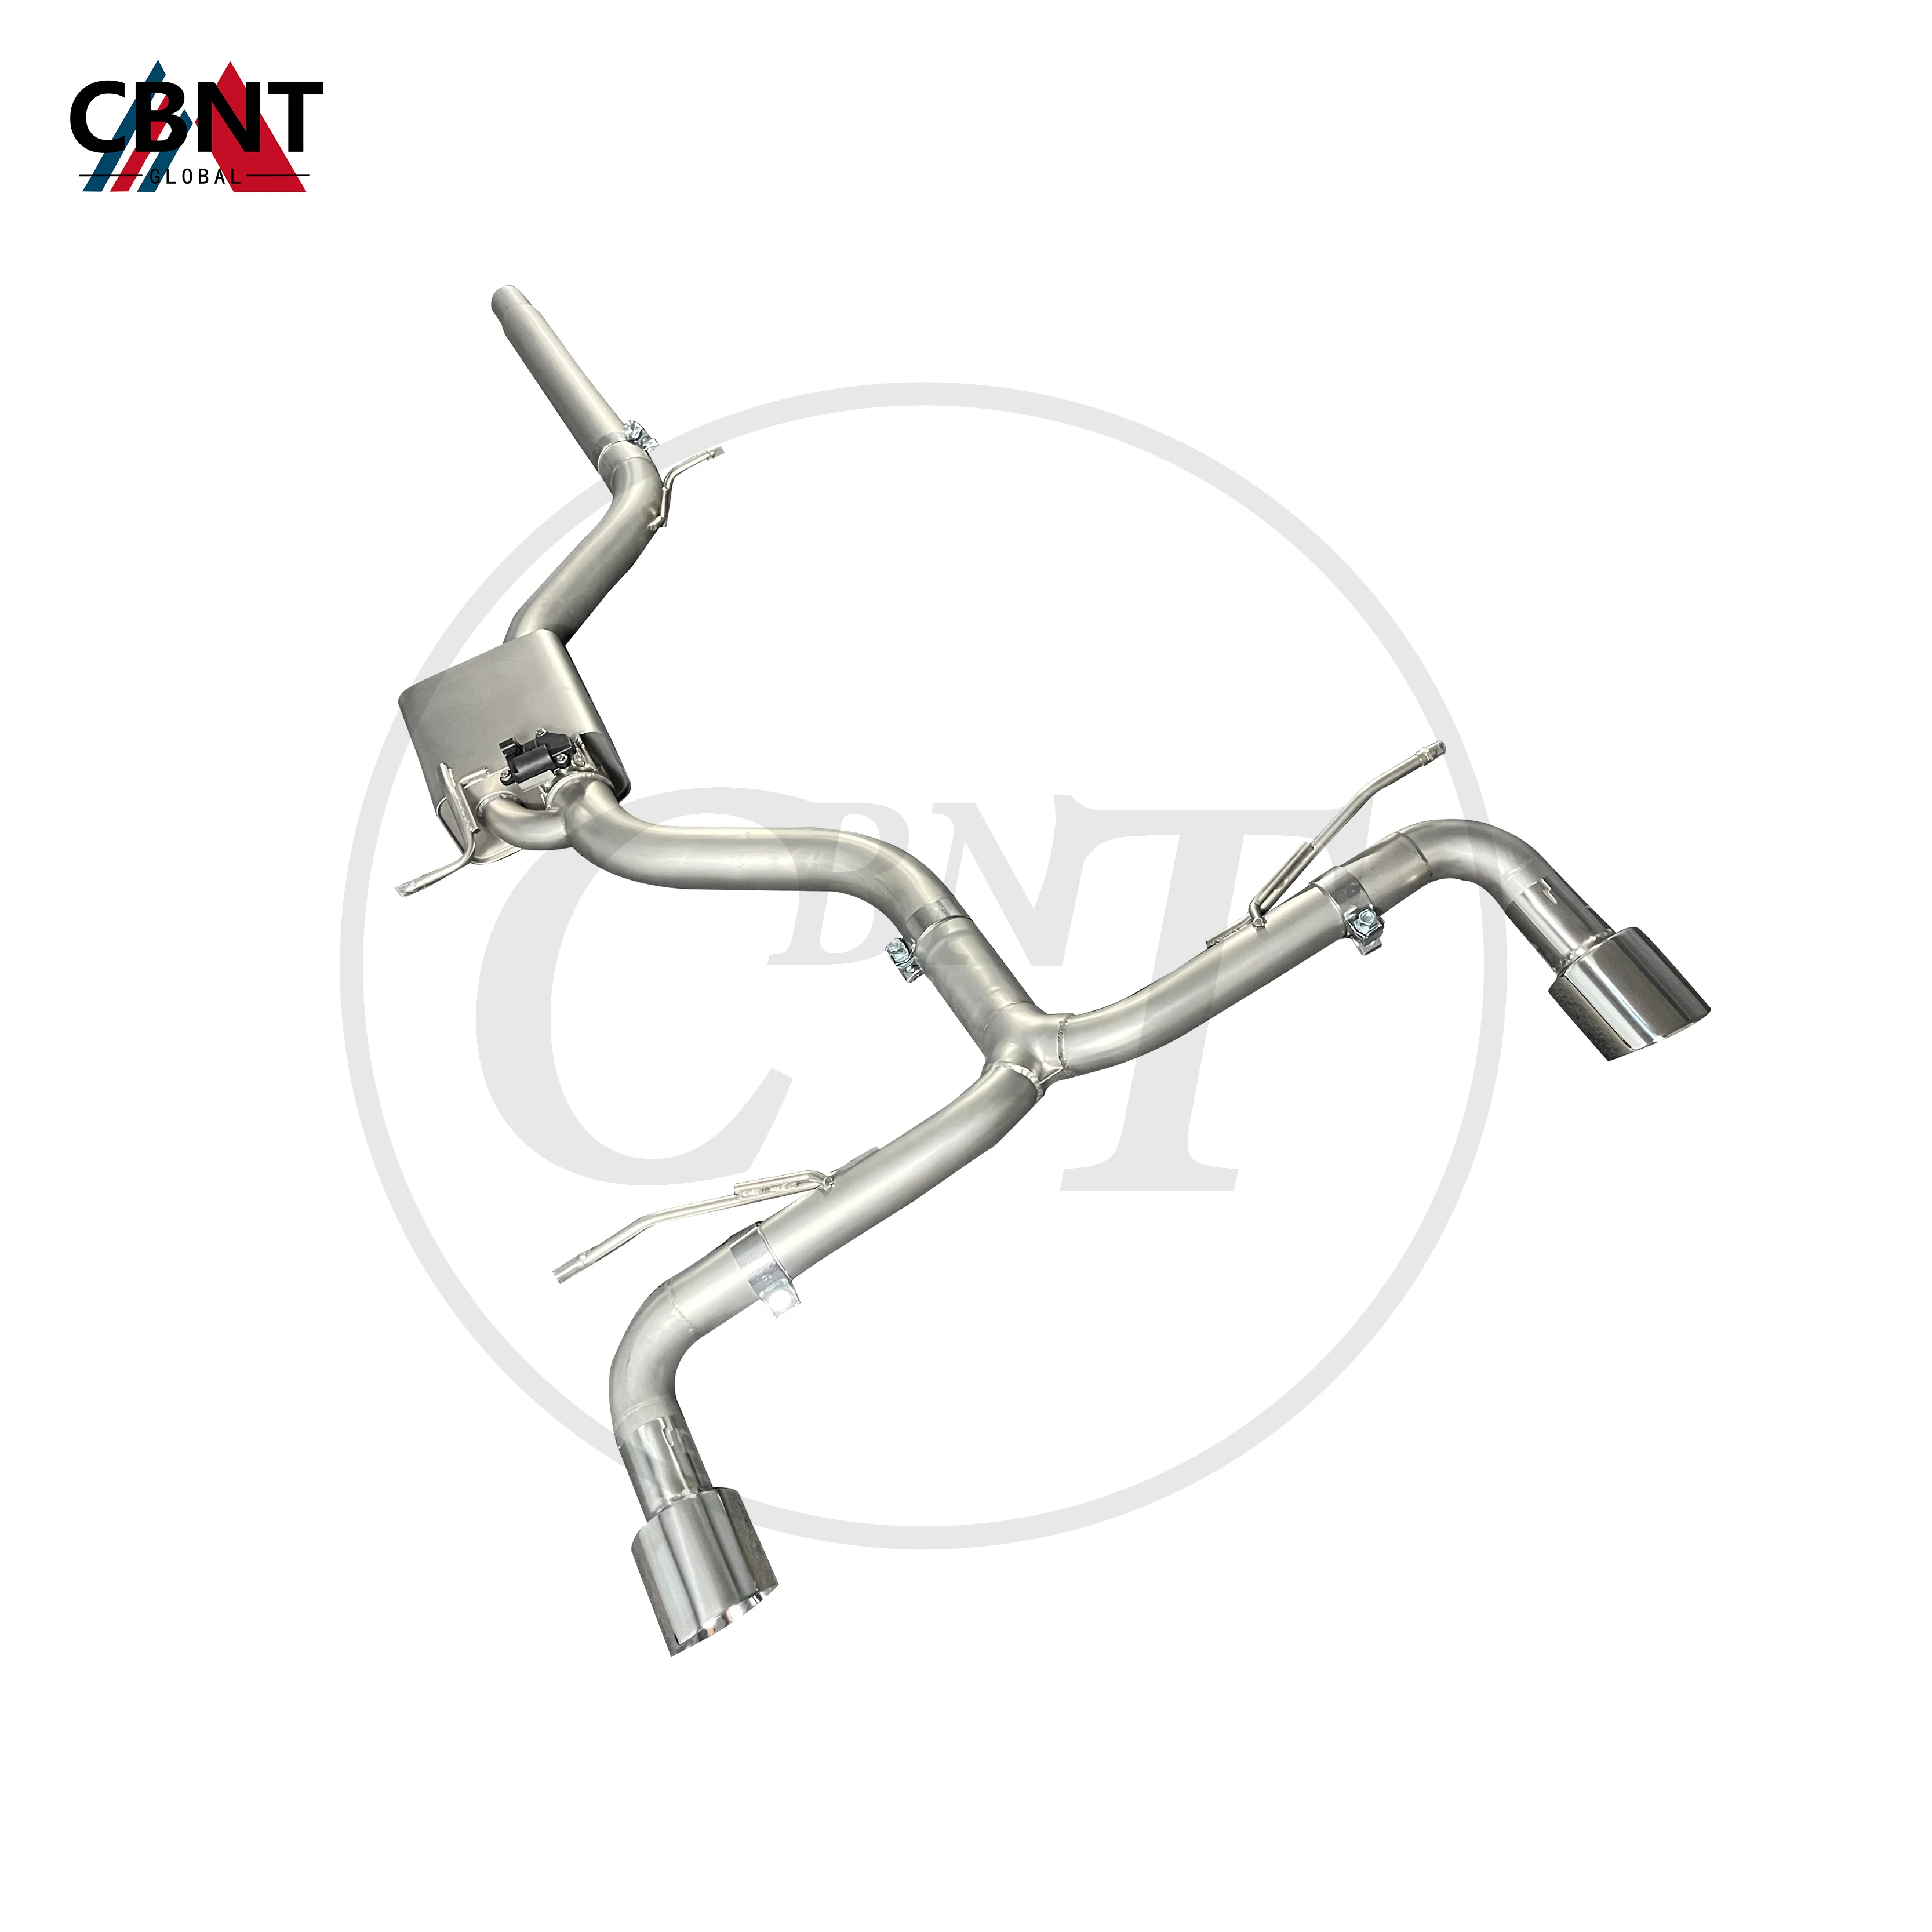 

CBNT Exhaust System Pipe Catback Valvetronic SS304 High Performance Car Accessories For VW Golf MK6 MK7 GTI Golf 6/7 GTI